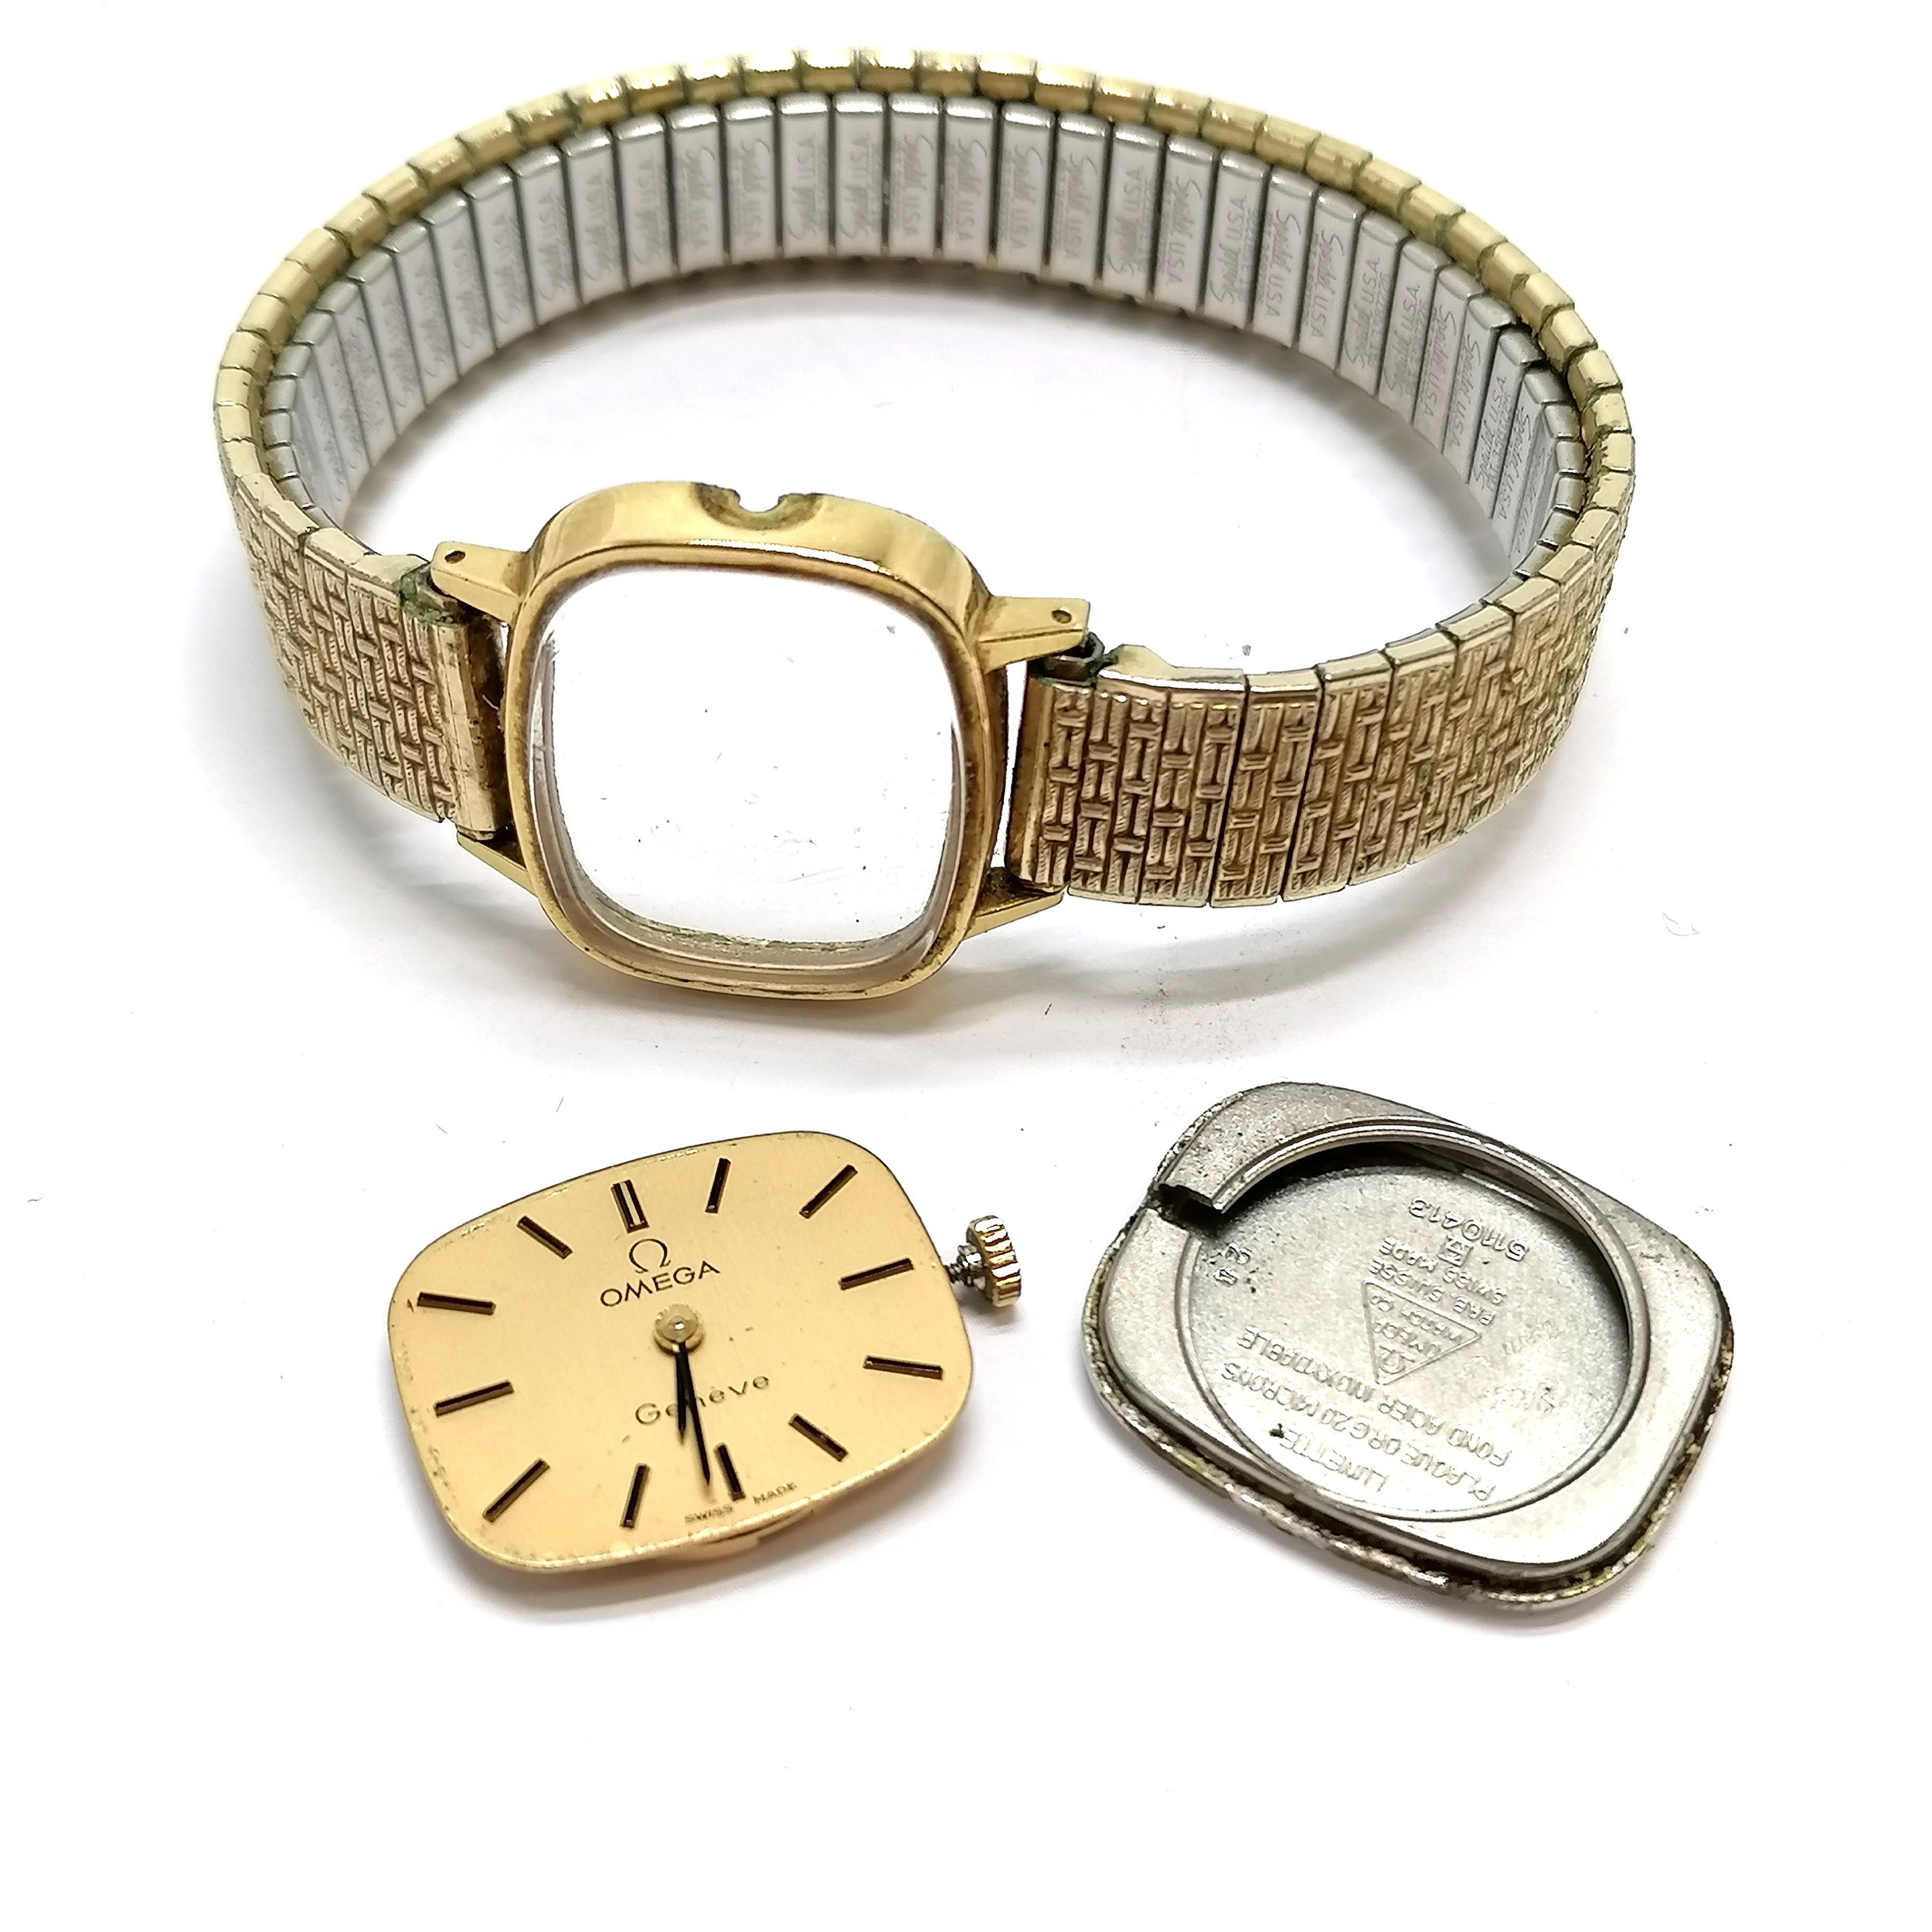 Omega mid-size manual wind wristwatch with 625 movement in a gold plated case on a stretchy - Image 3 of 3